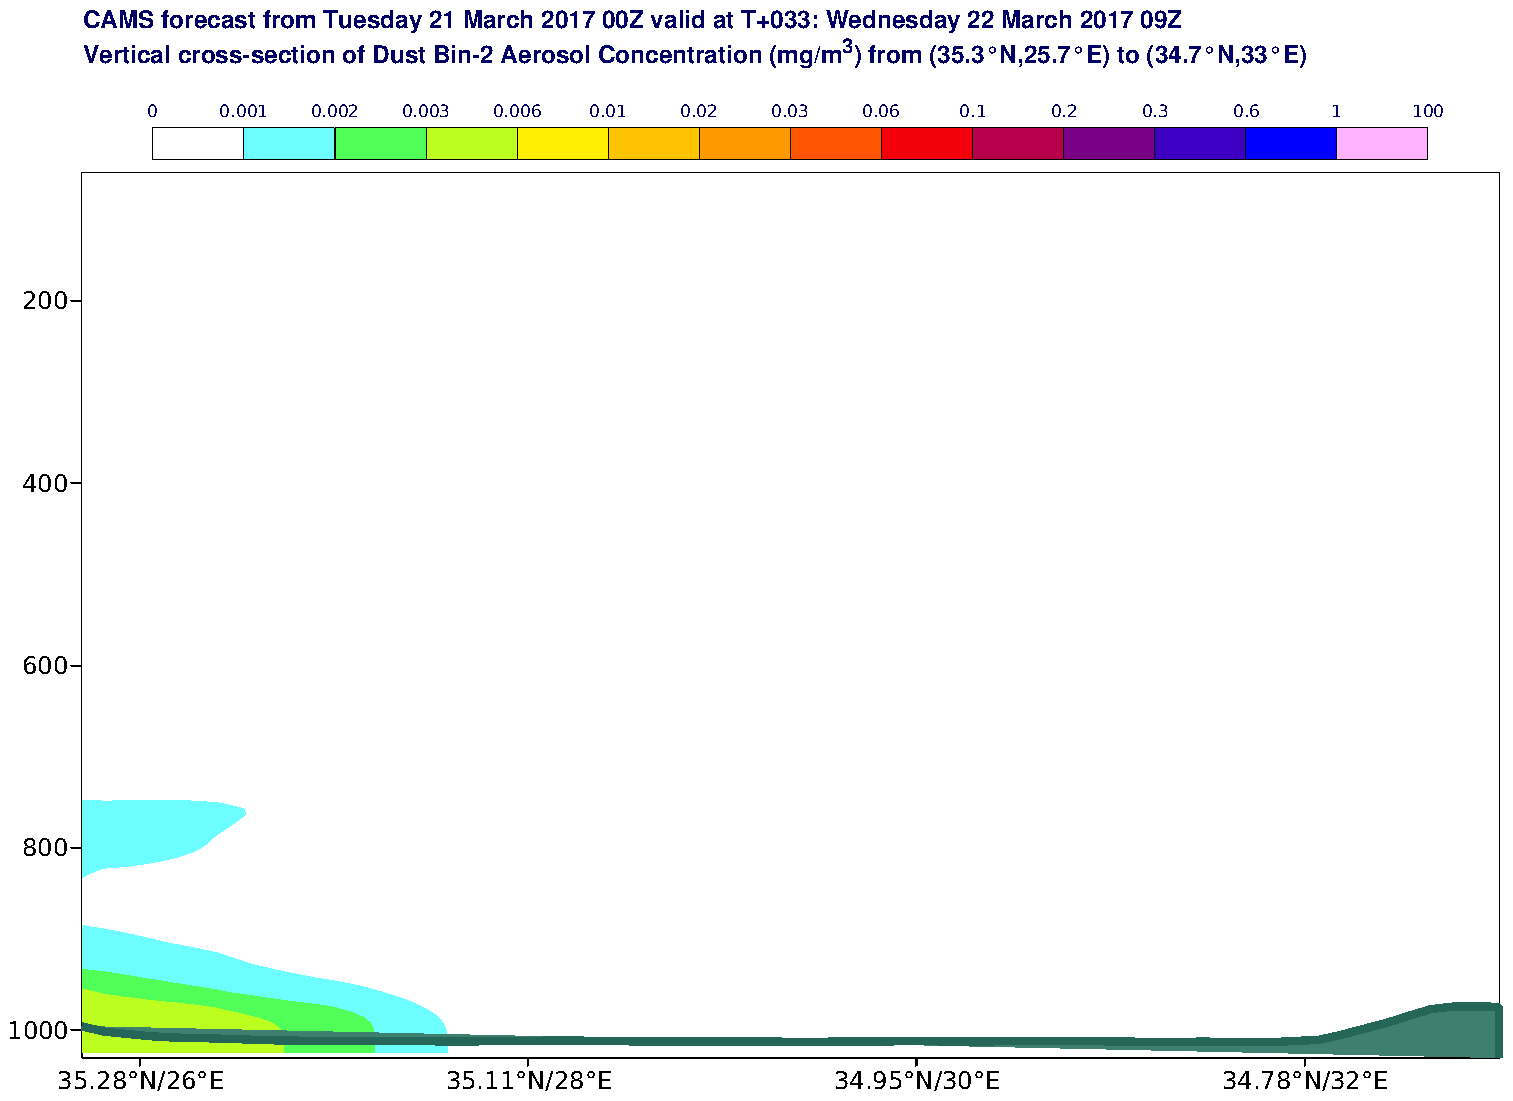 Vertical cross-section of Dust Bin-2 Aerosol Concentration (mg/m3) valid at T33 - 2017-03-22 09:00